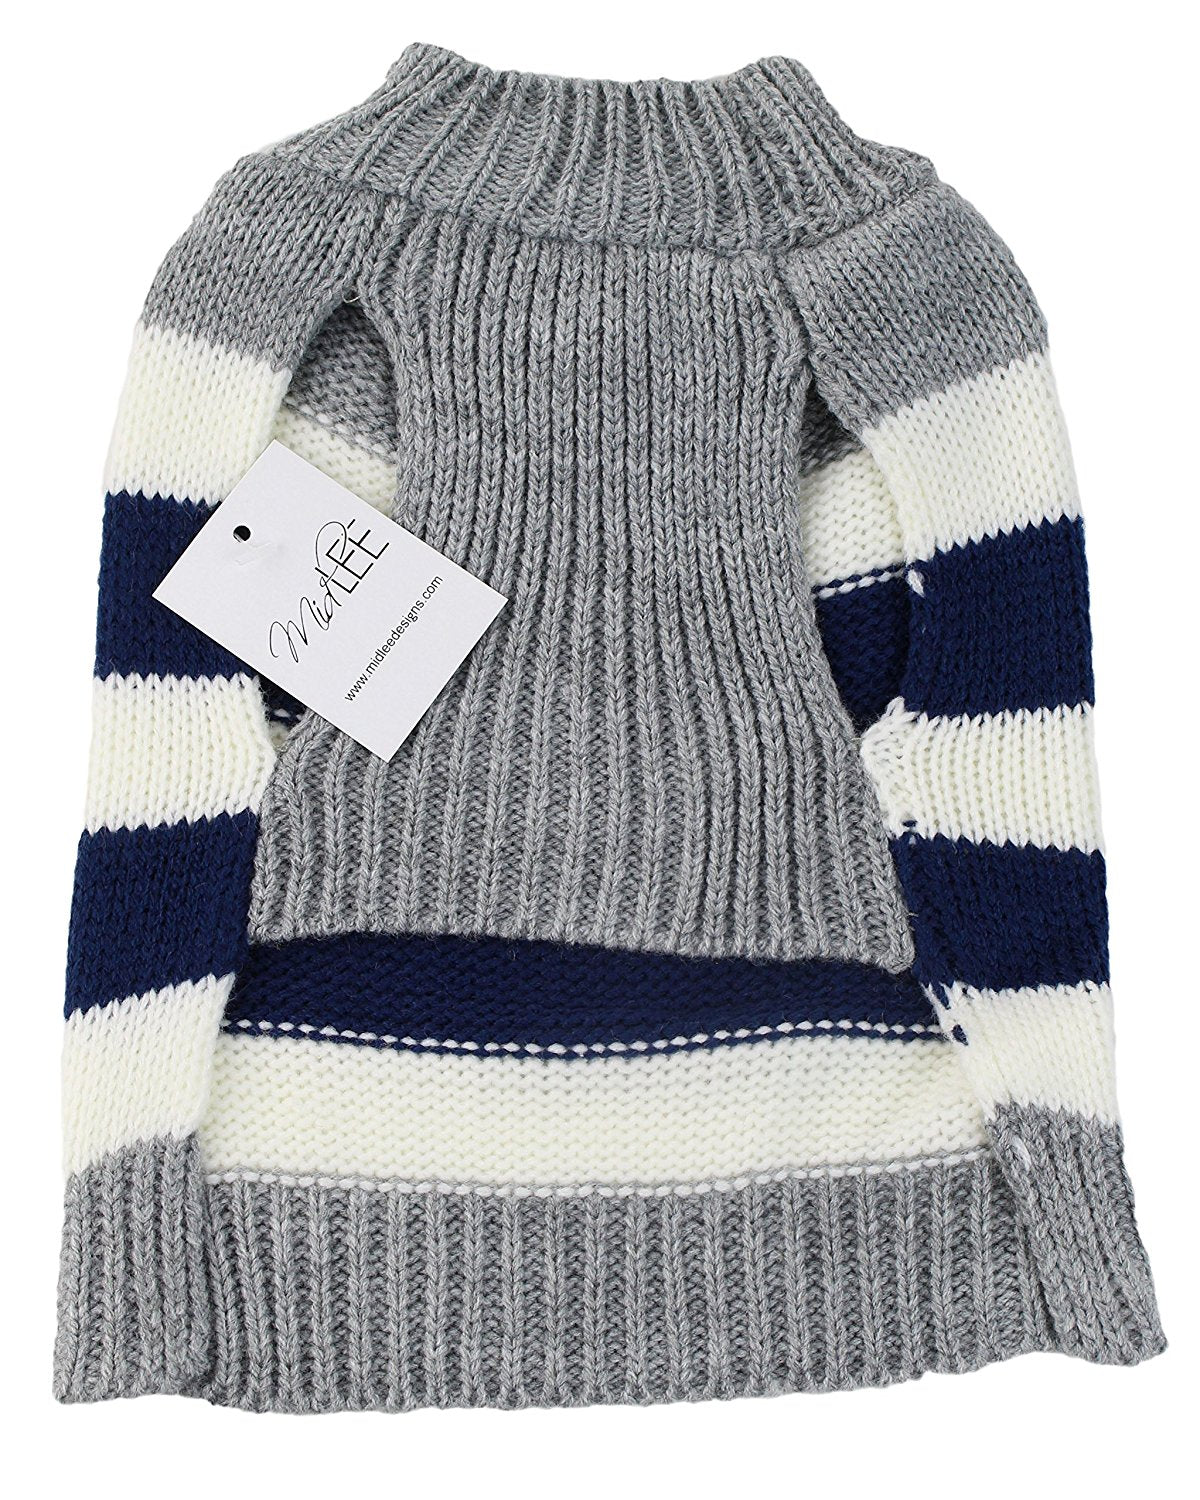 Midlee Striped Colorblock Dog Sweater